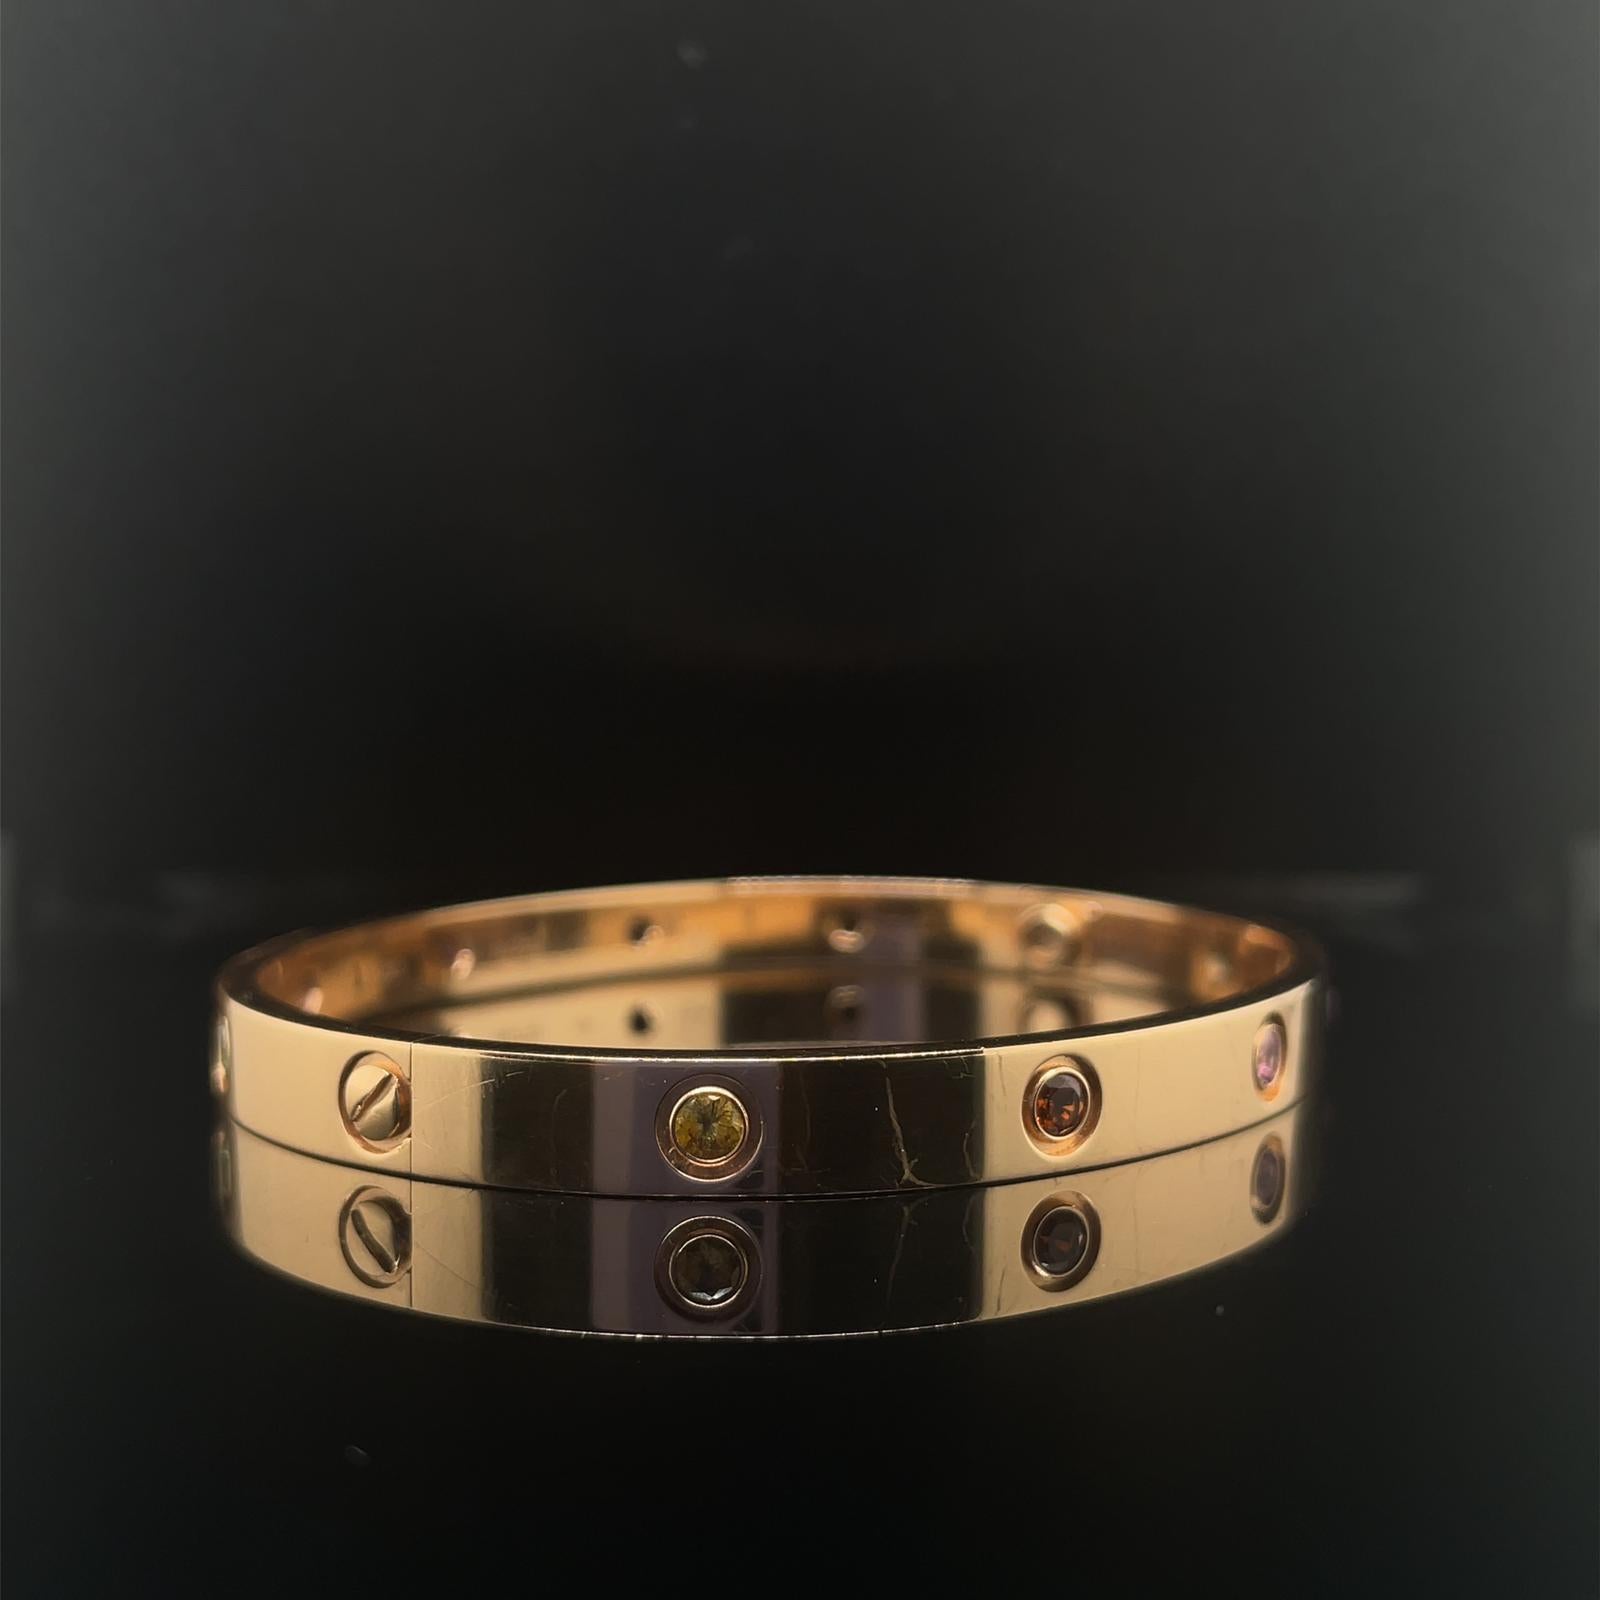 A classic vintage Cartier gem set Love bangle set in 18k rose gold.

The Love bangle is a timeless design, both elegant, enduring and comfortable to wear.

Designed with ten individual stones set in the place of where would have been the iconic Love